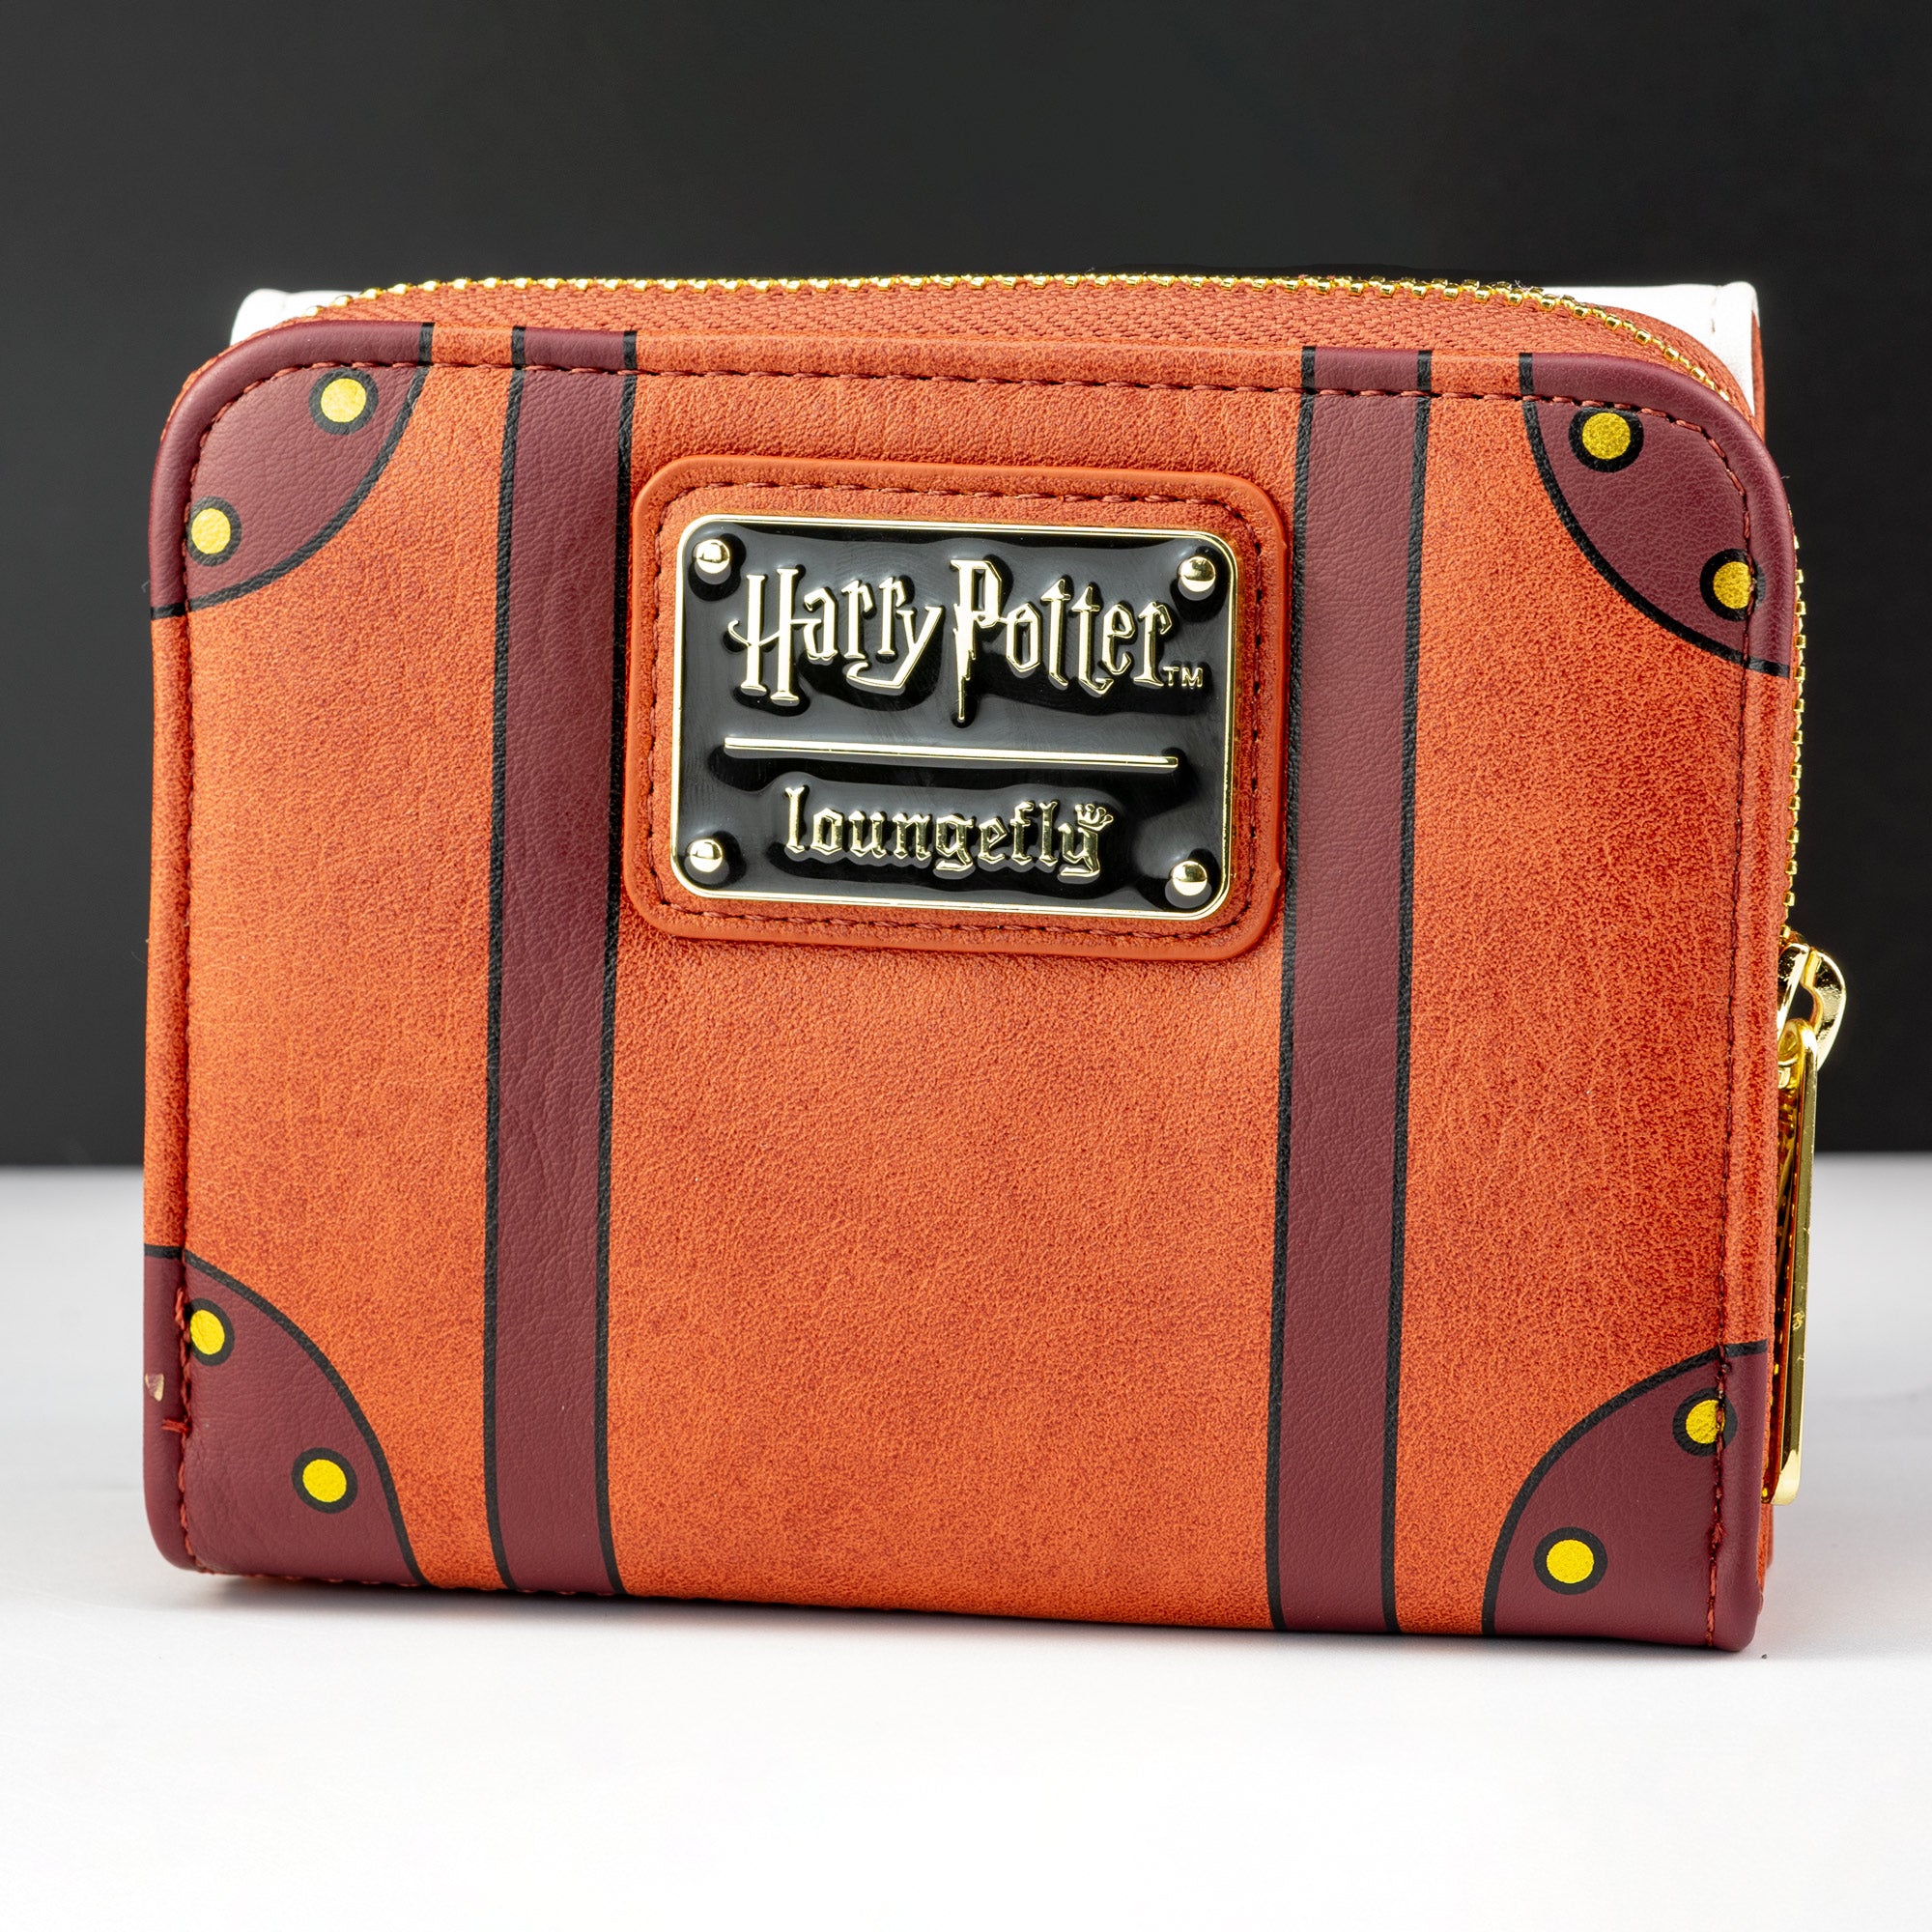 Loungefly x Harry Potter Off to Hogwarts Wallet